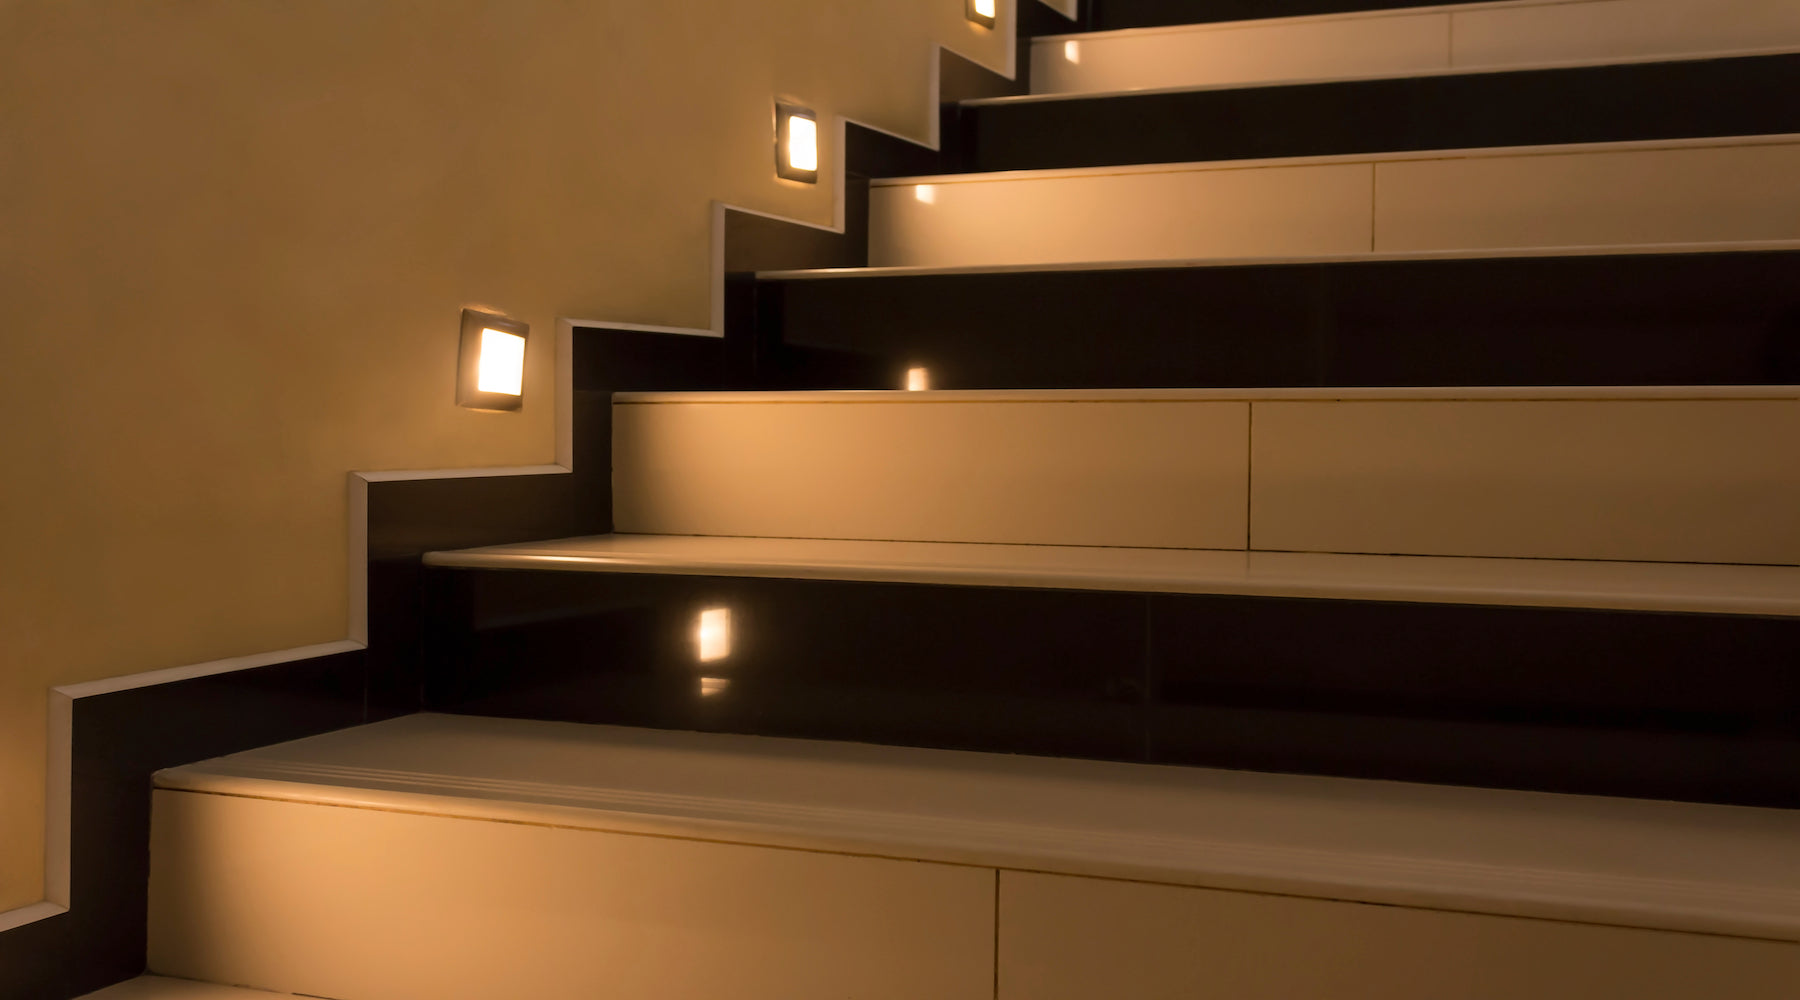 Step lights installed along staircase